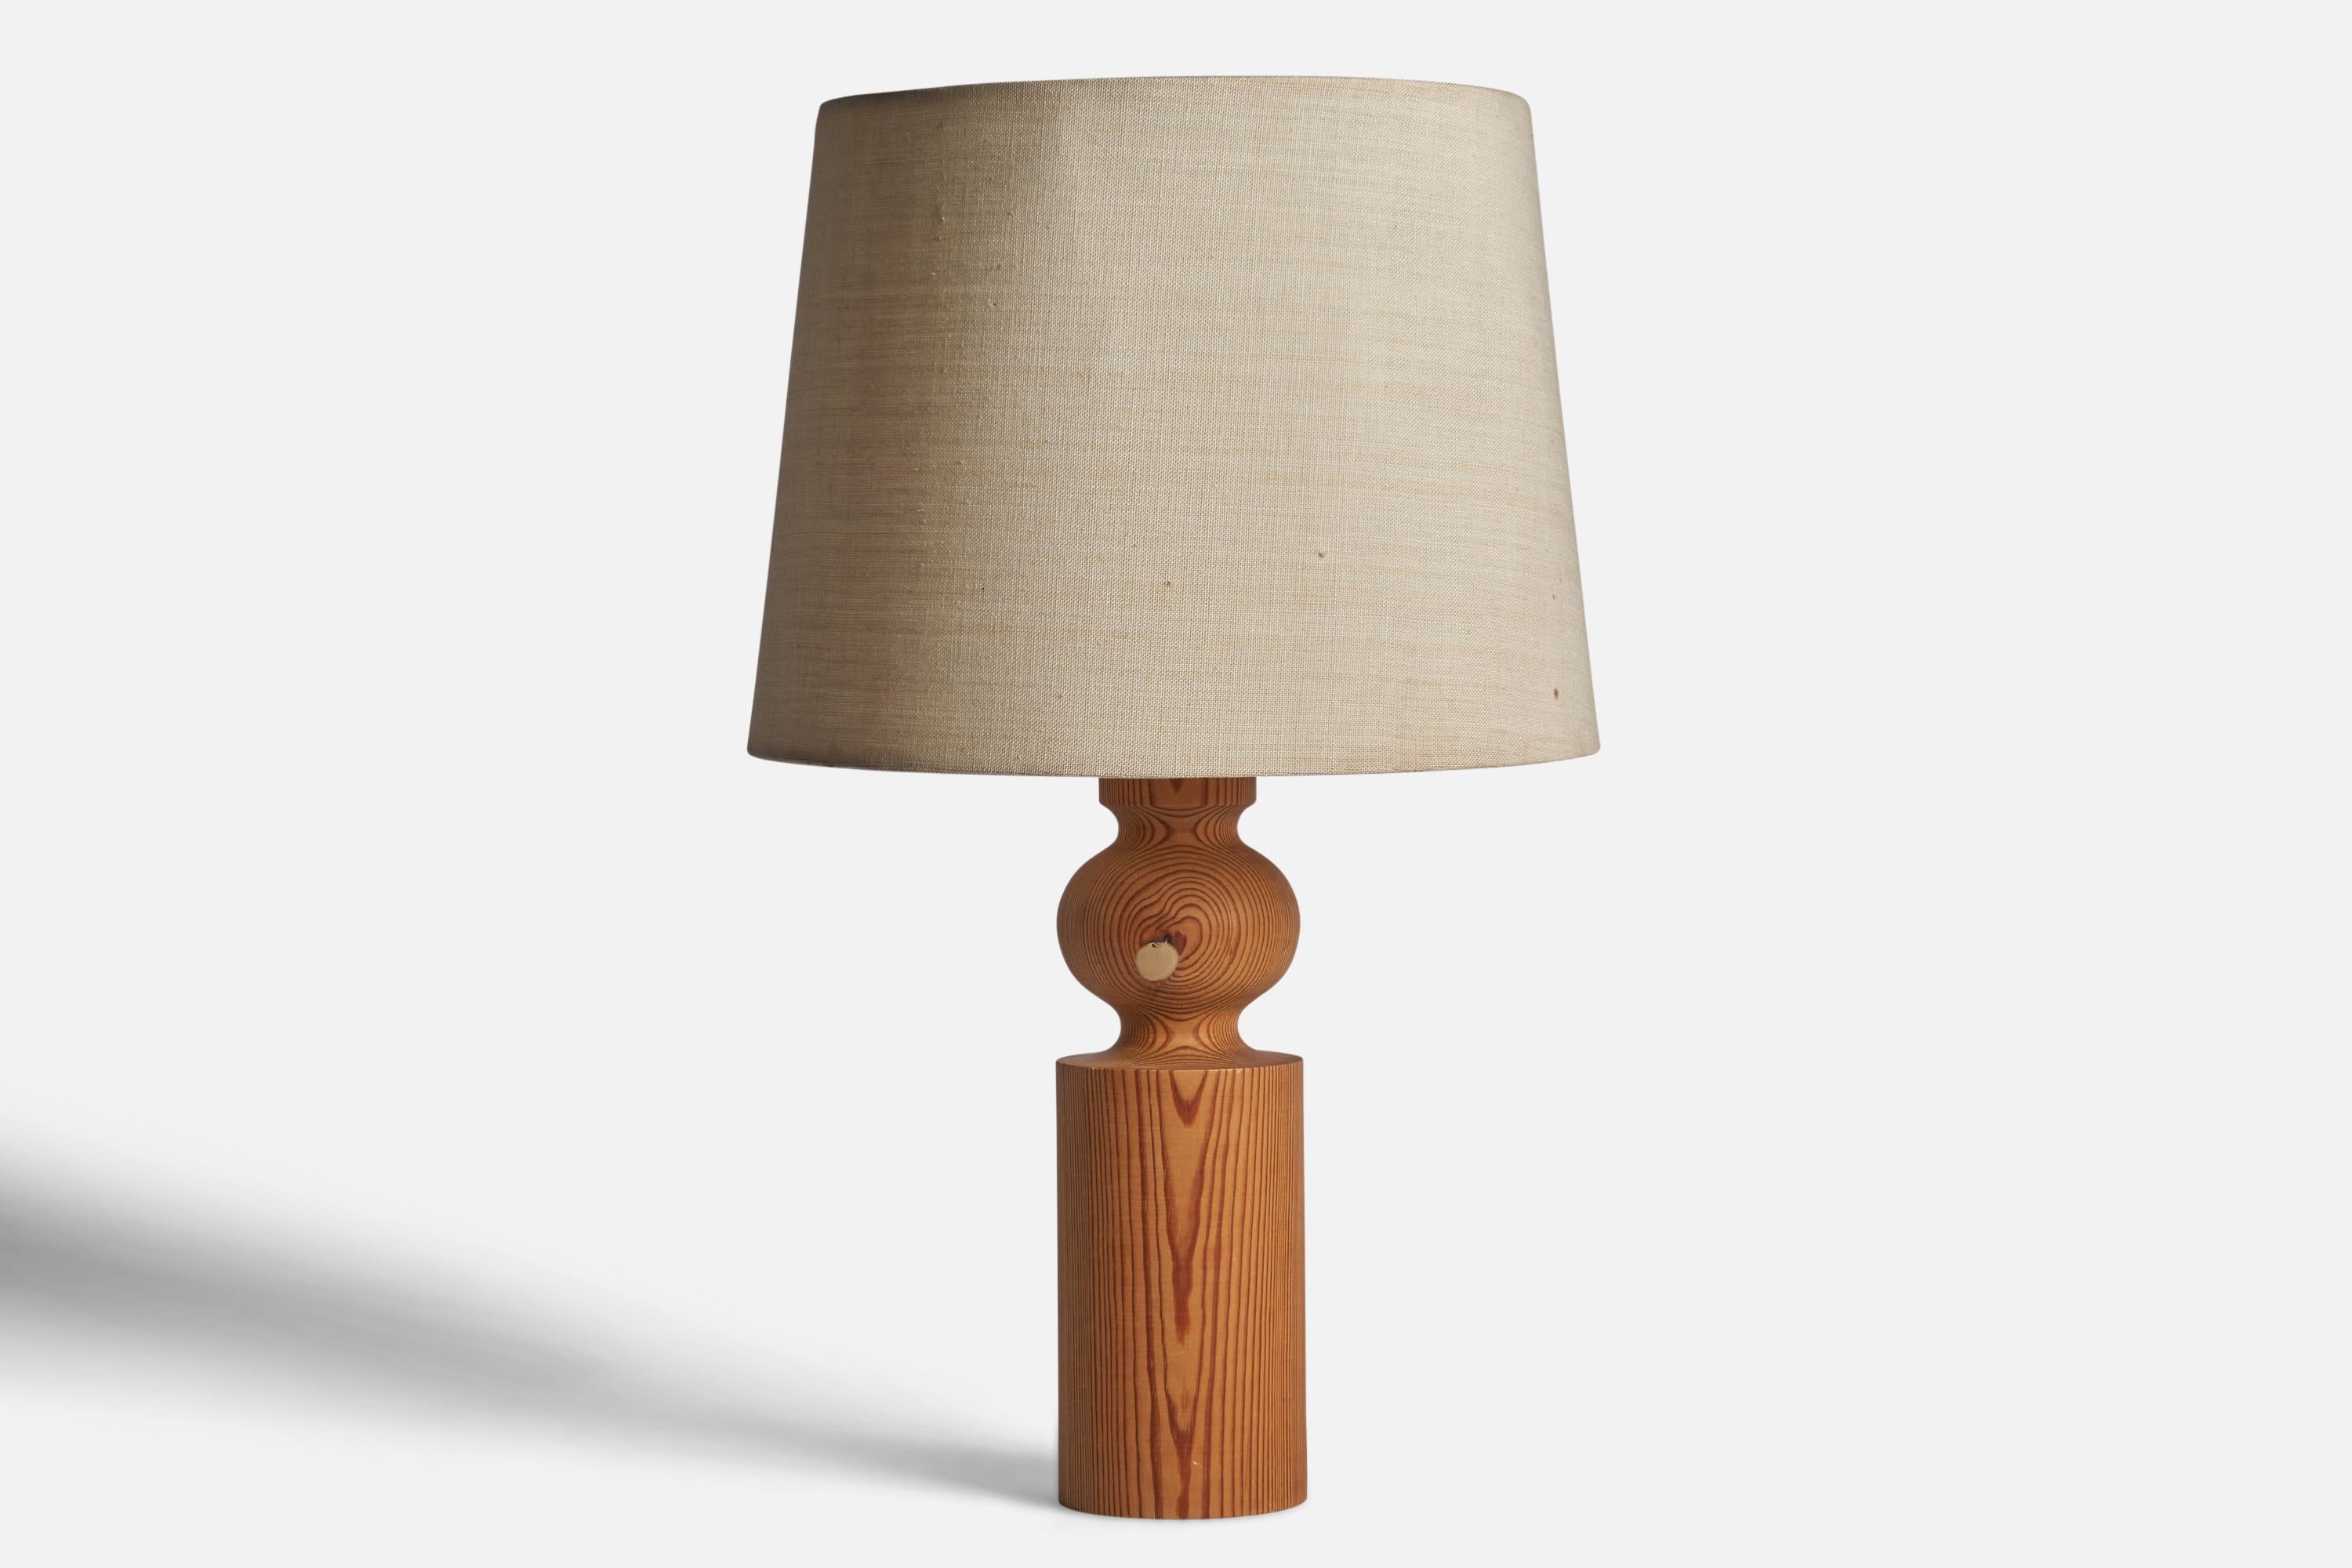 A pine and beige fabric table lamp designed by Uno Kristiansson and produced by Luxus, Vittsjö, Sweden, 1960s.

Overall Dimensions (inches): 20.85” H x 12” Diameter
Bulb Specifications: E-26 Bulb
Number of Sockets: 1
All lighting will be converted